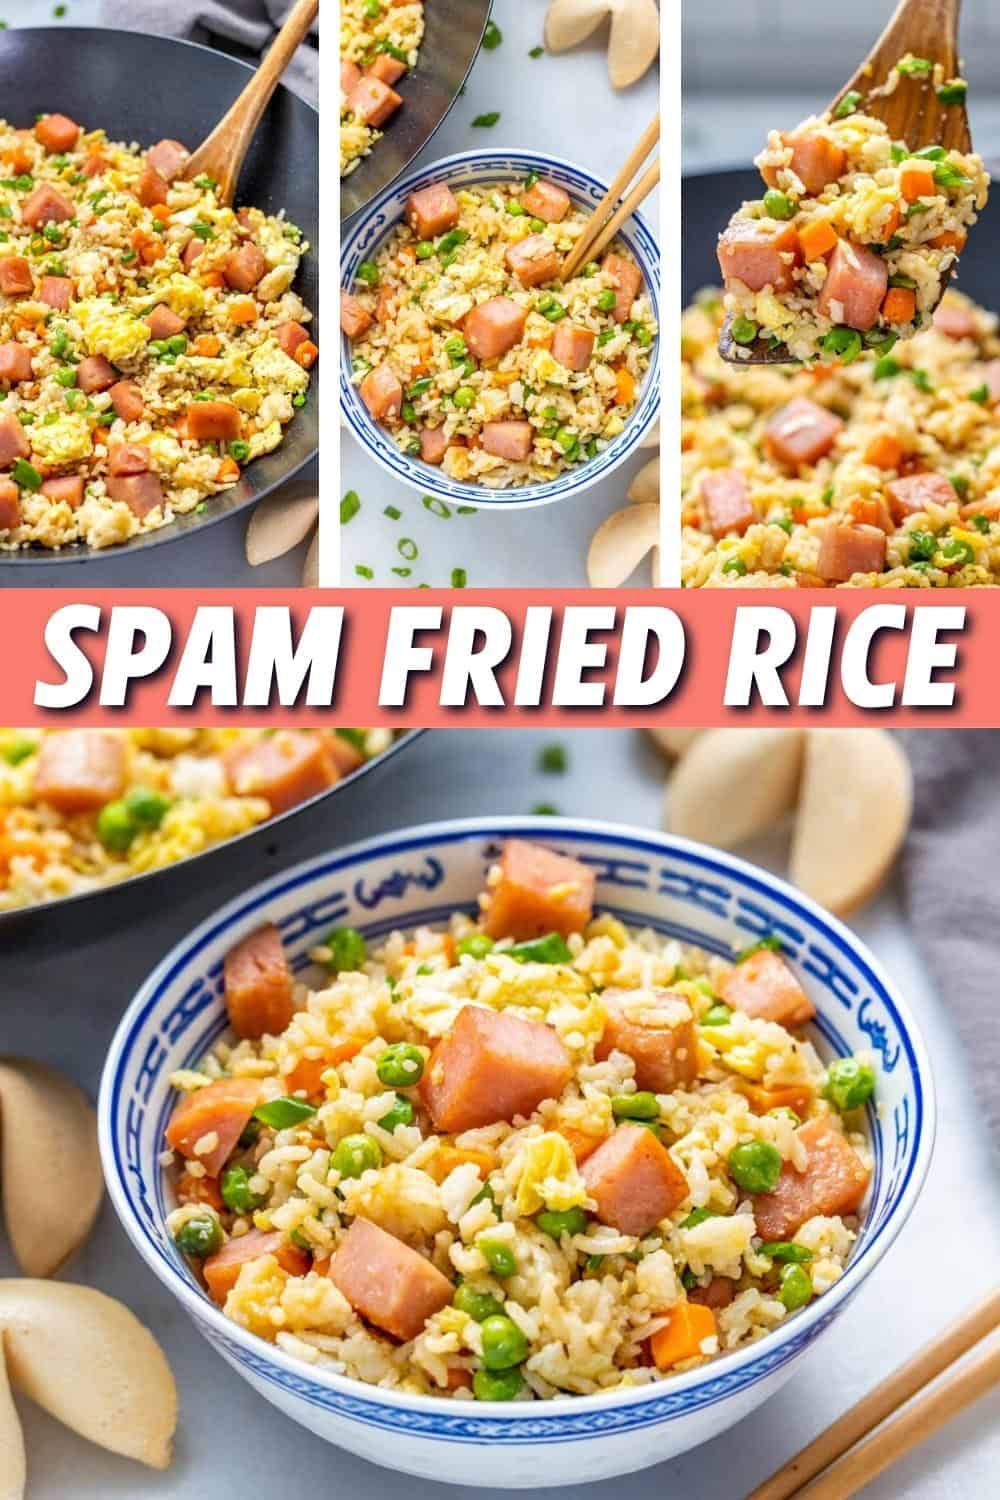 Takeout spam fried rice